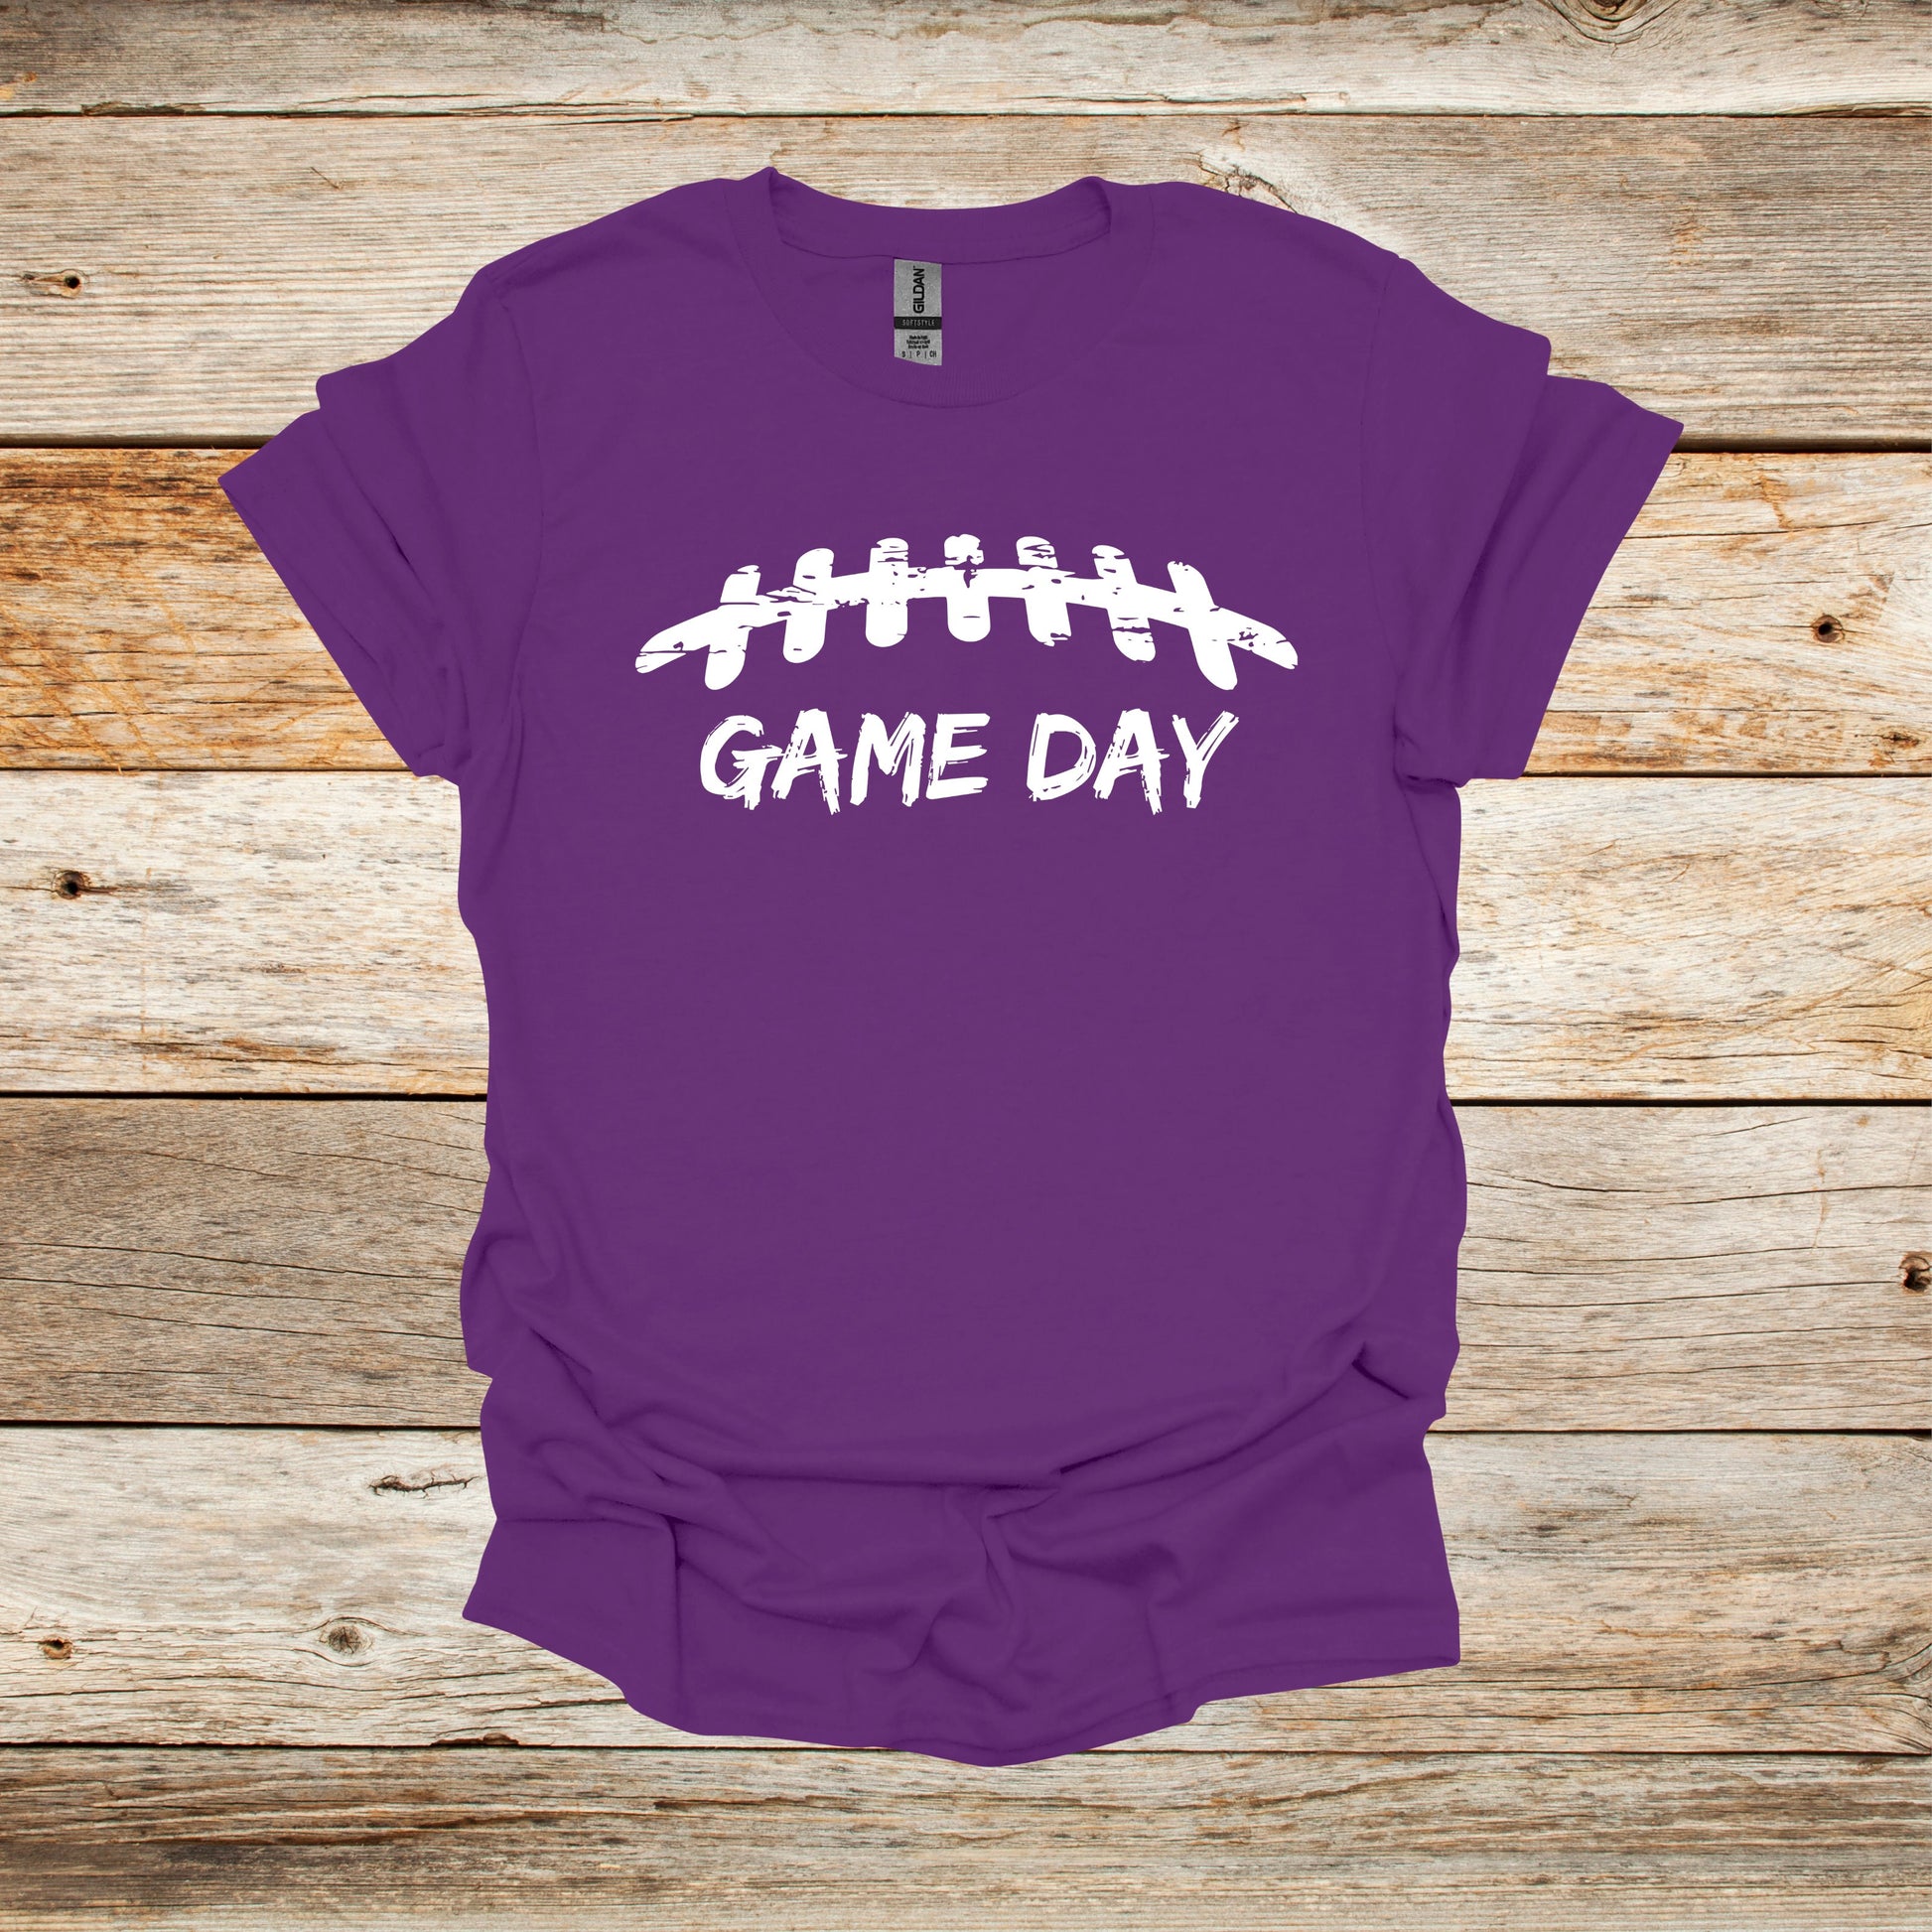 Football T-Shirt - Game Day Laces - Adult and Children's Tee Shirts - Game Day - Sports T-Shirts Graphic Avenue Purple Adult Small 